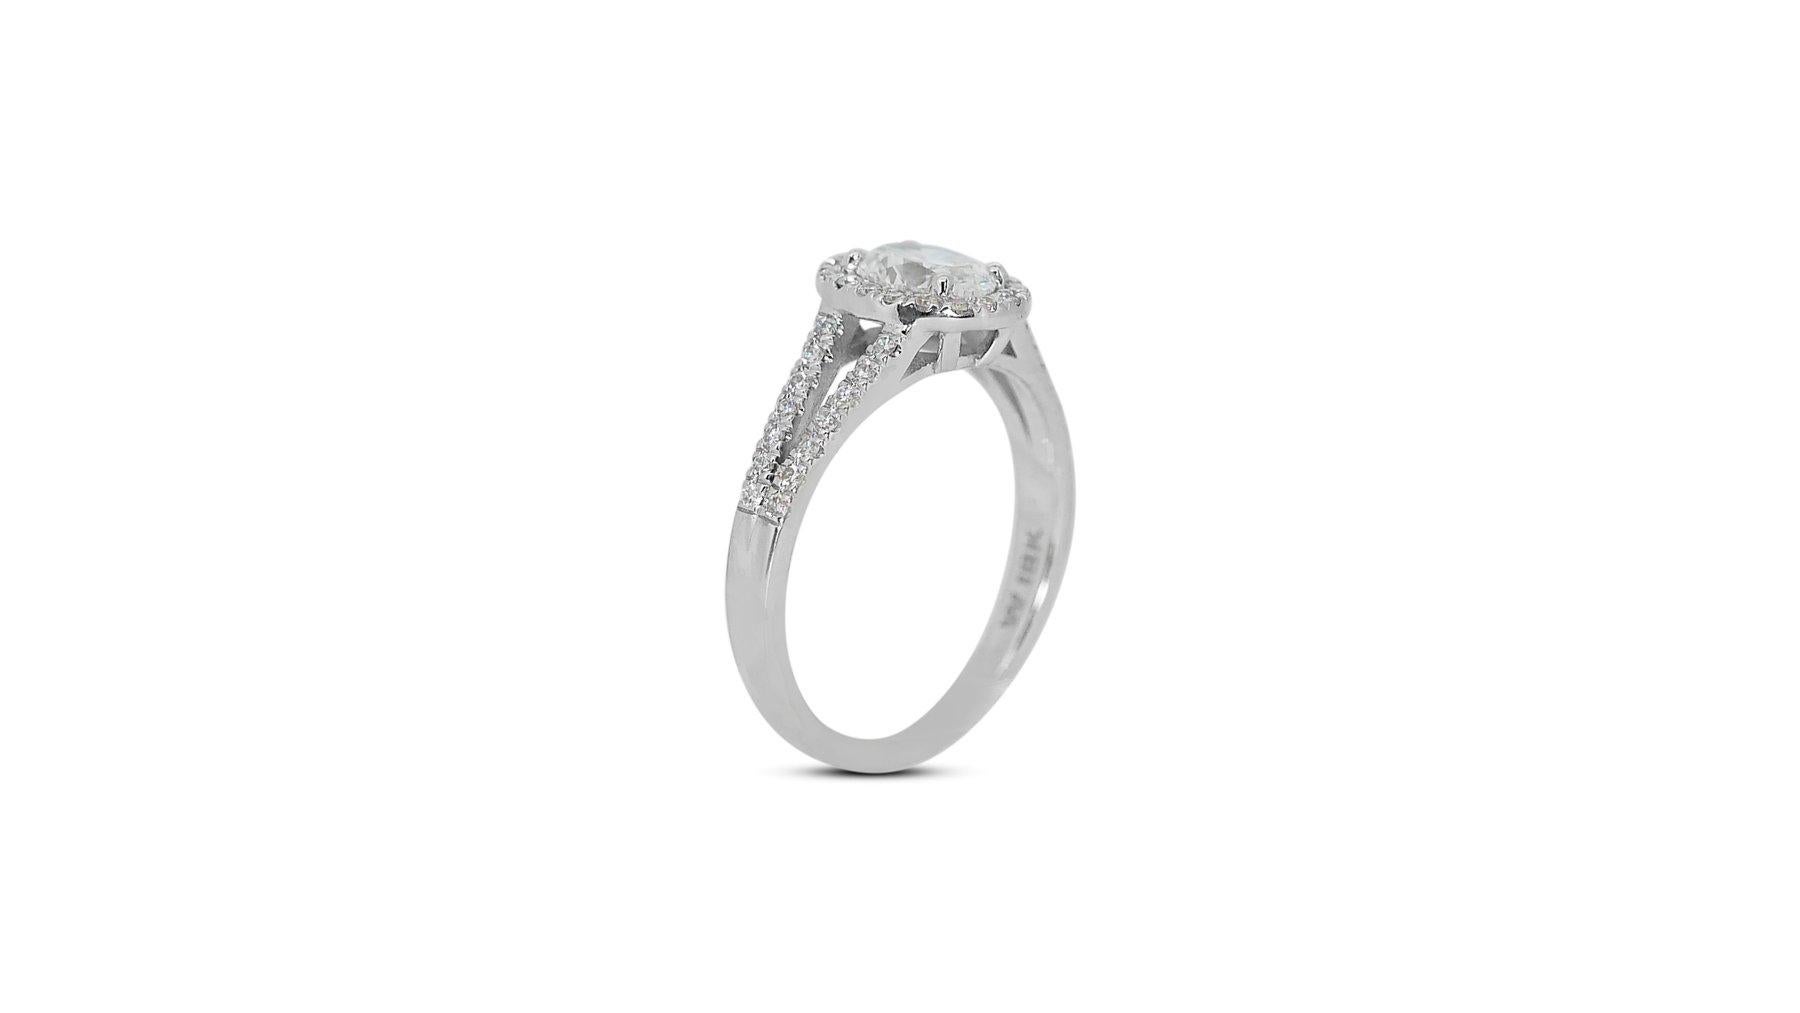 Glamorous 1.30ct Oval Diamond Halo Ring in 18K White Gold - GIA Certified For Sale 3